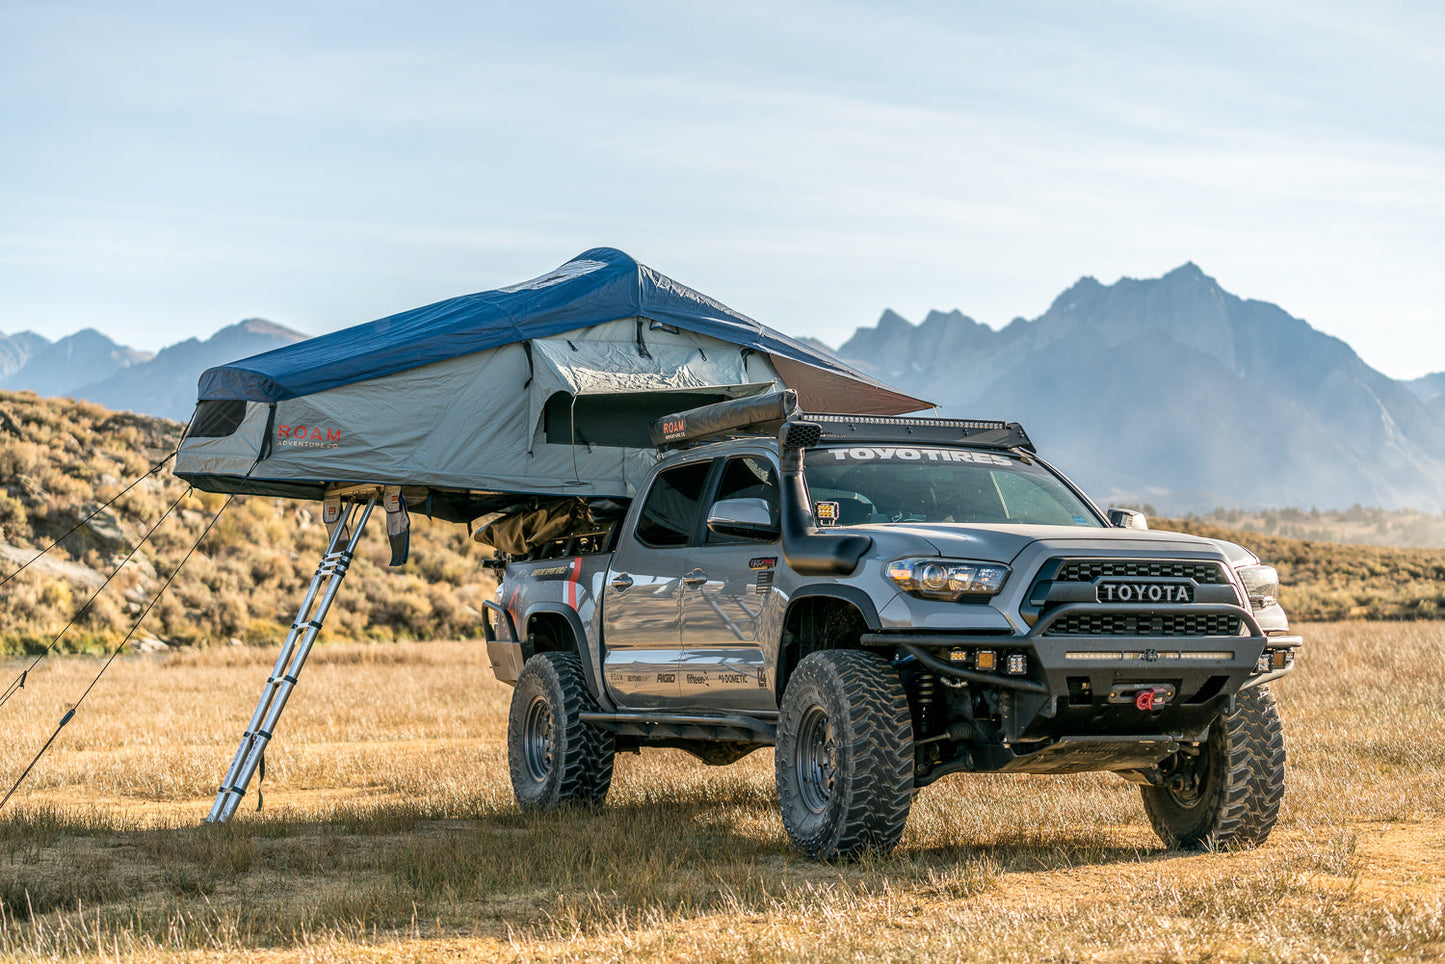 THE VAGABOND ROOFTOP TENT - BaseCamp Provisions